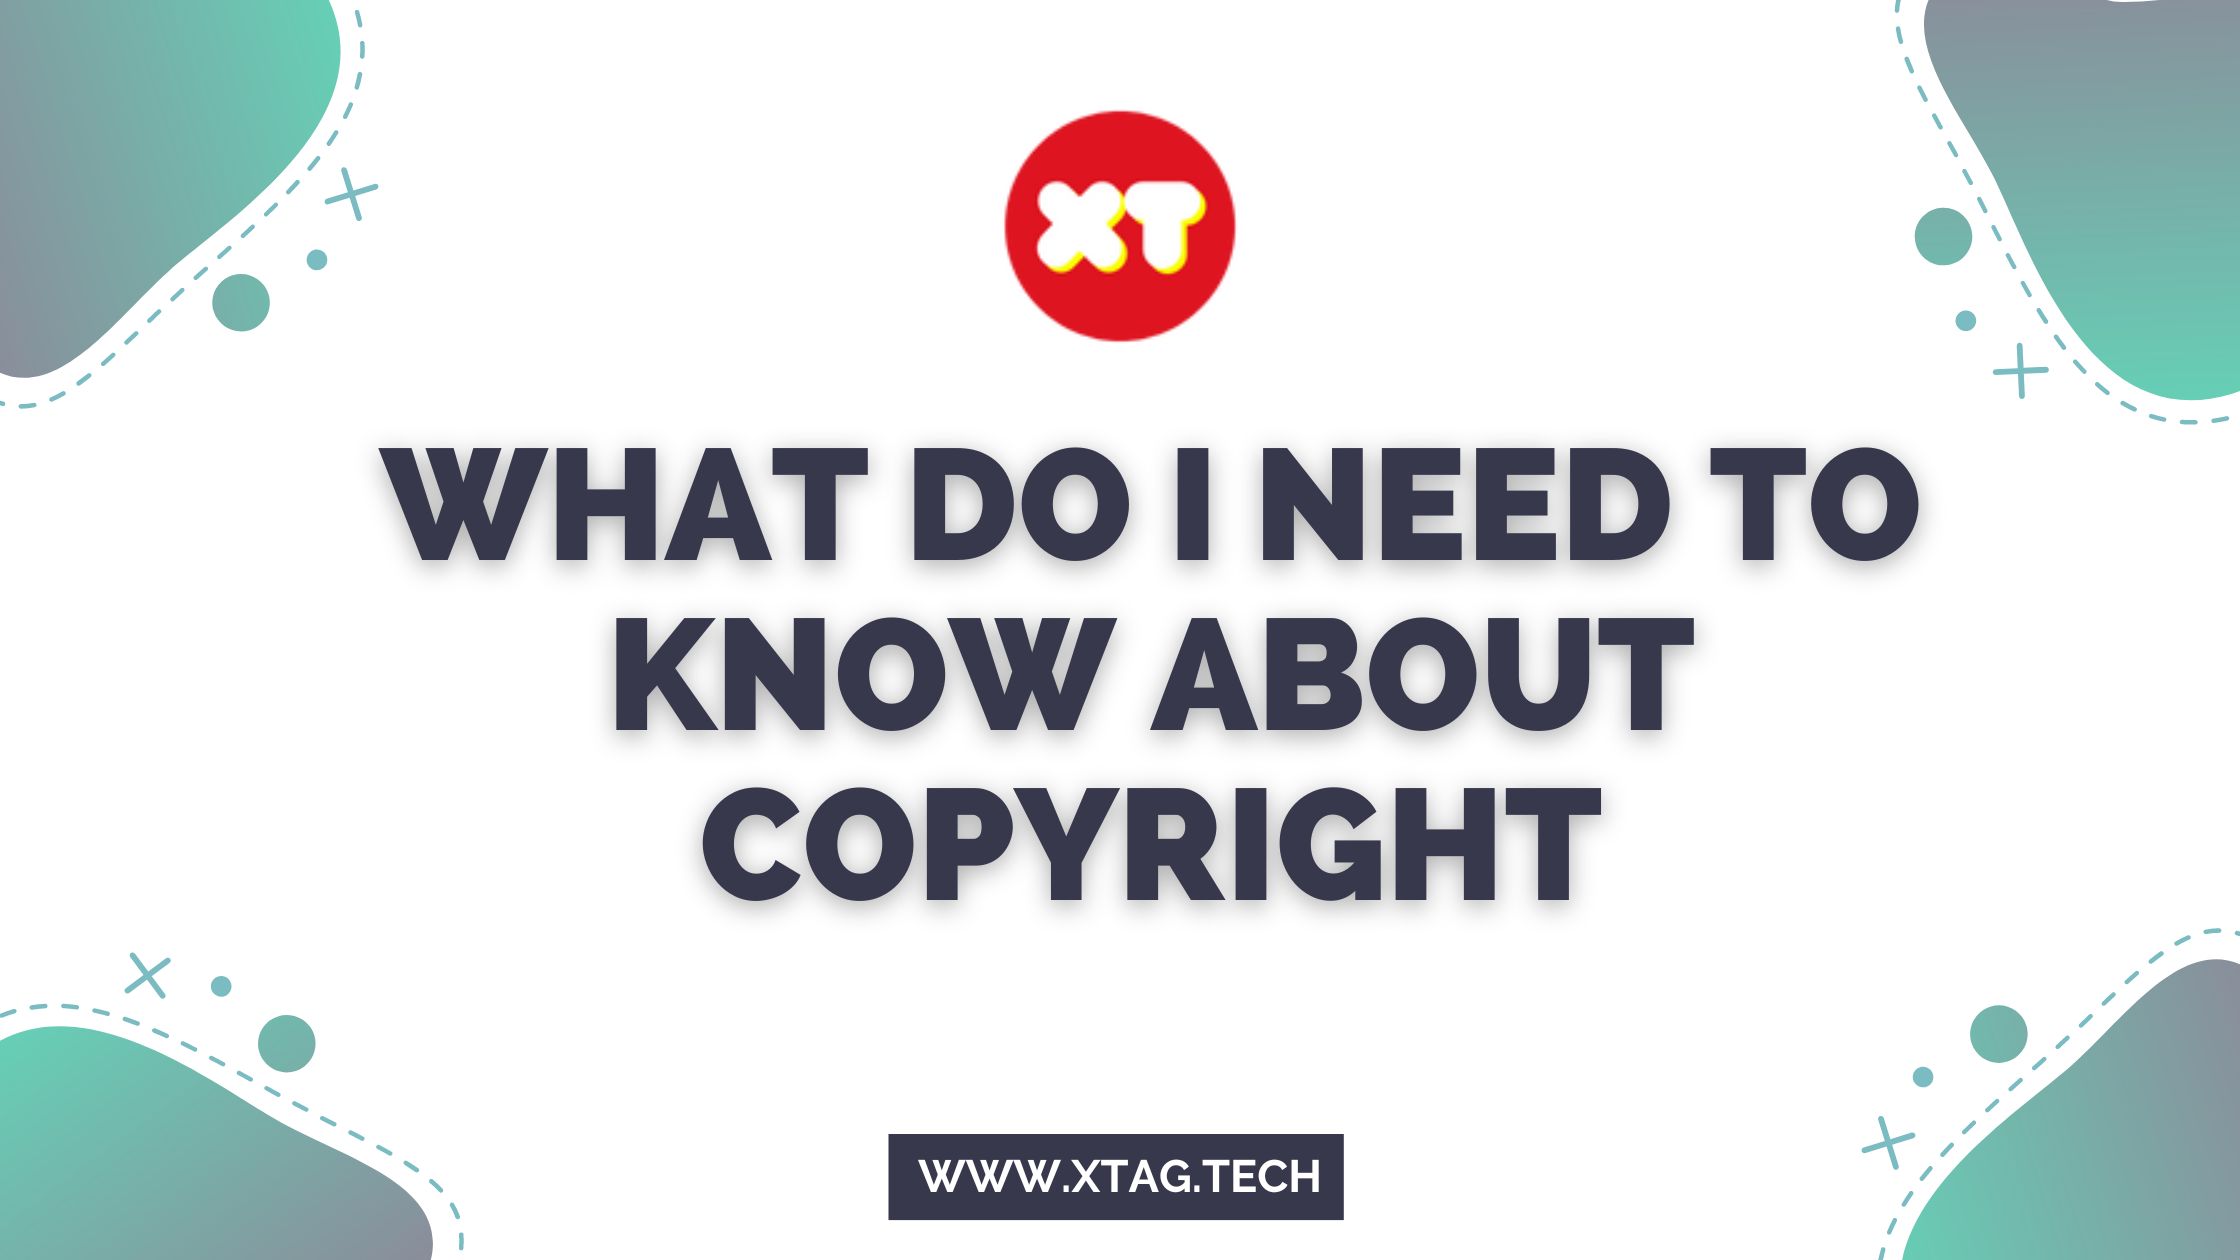 What Do I Need To Know About Copyright And Trademark Regulations To Avoid Issues?